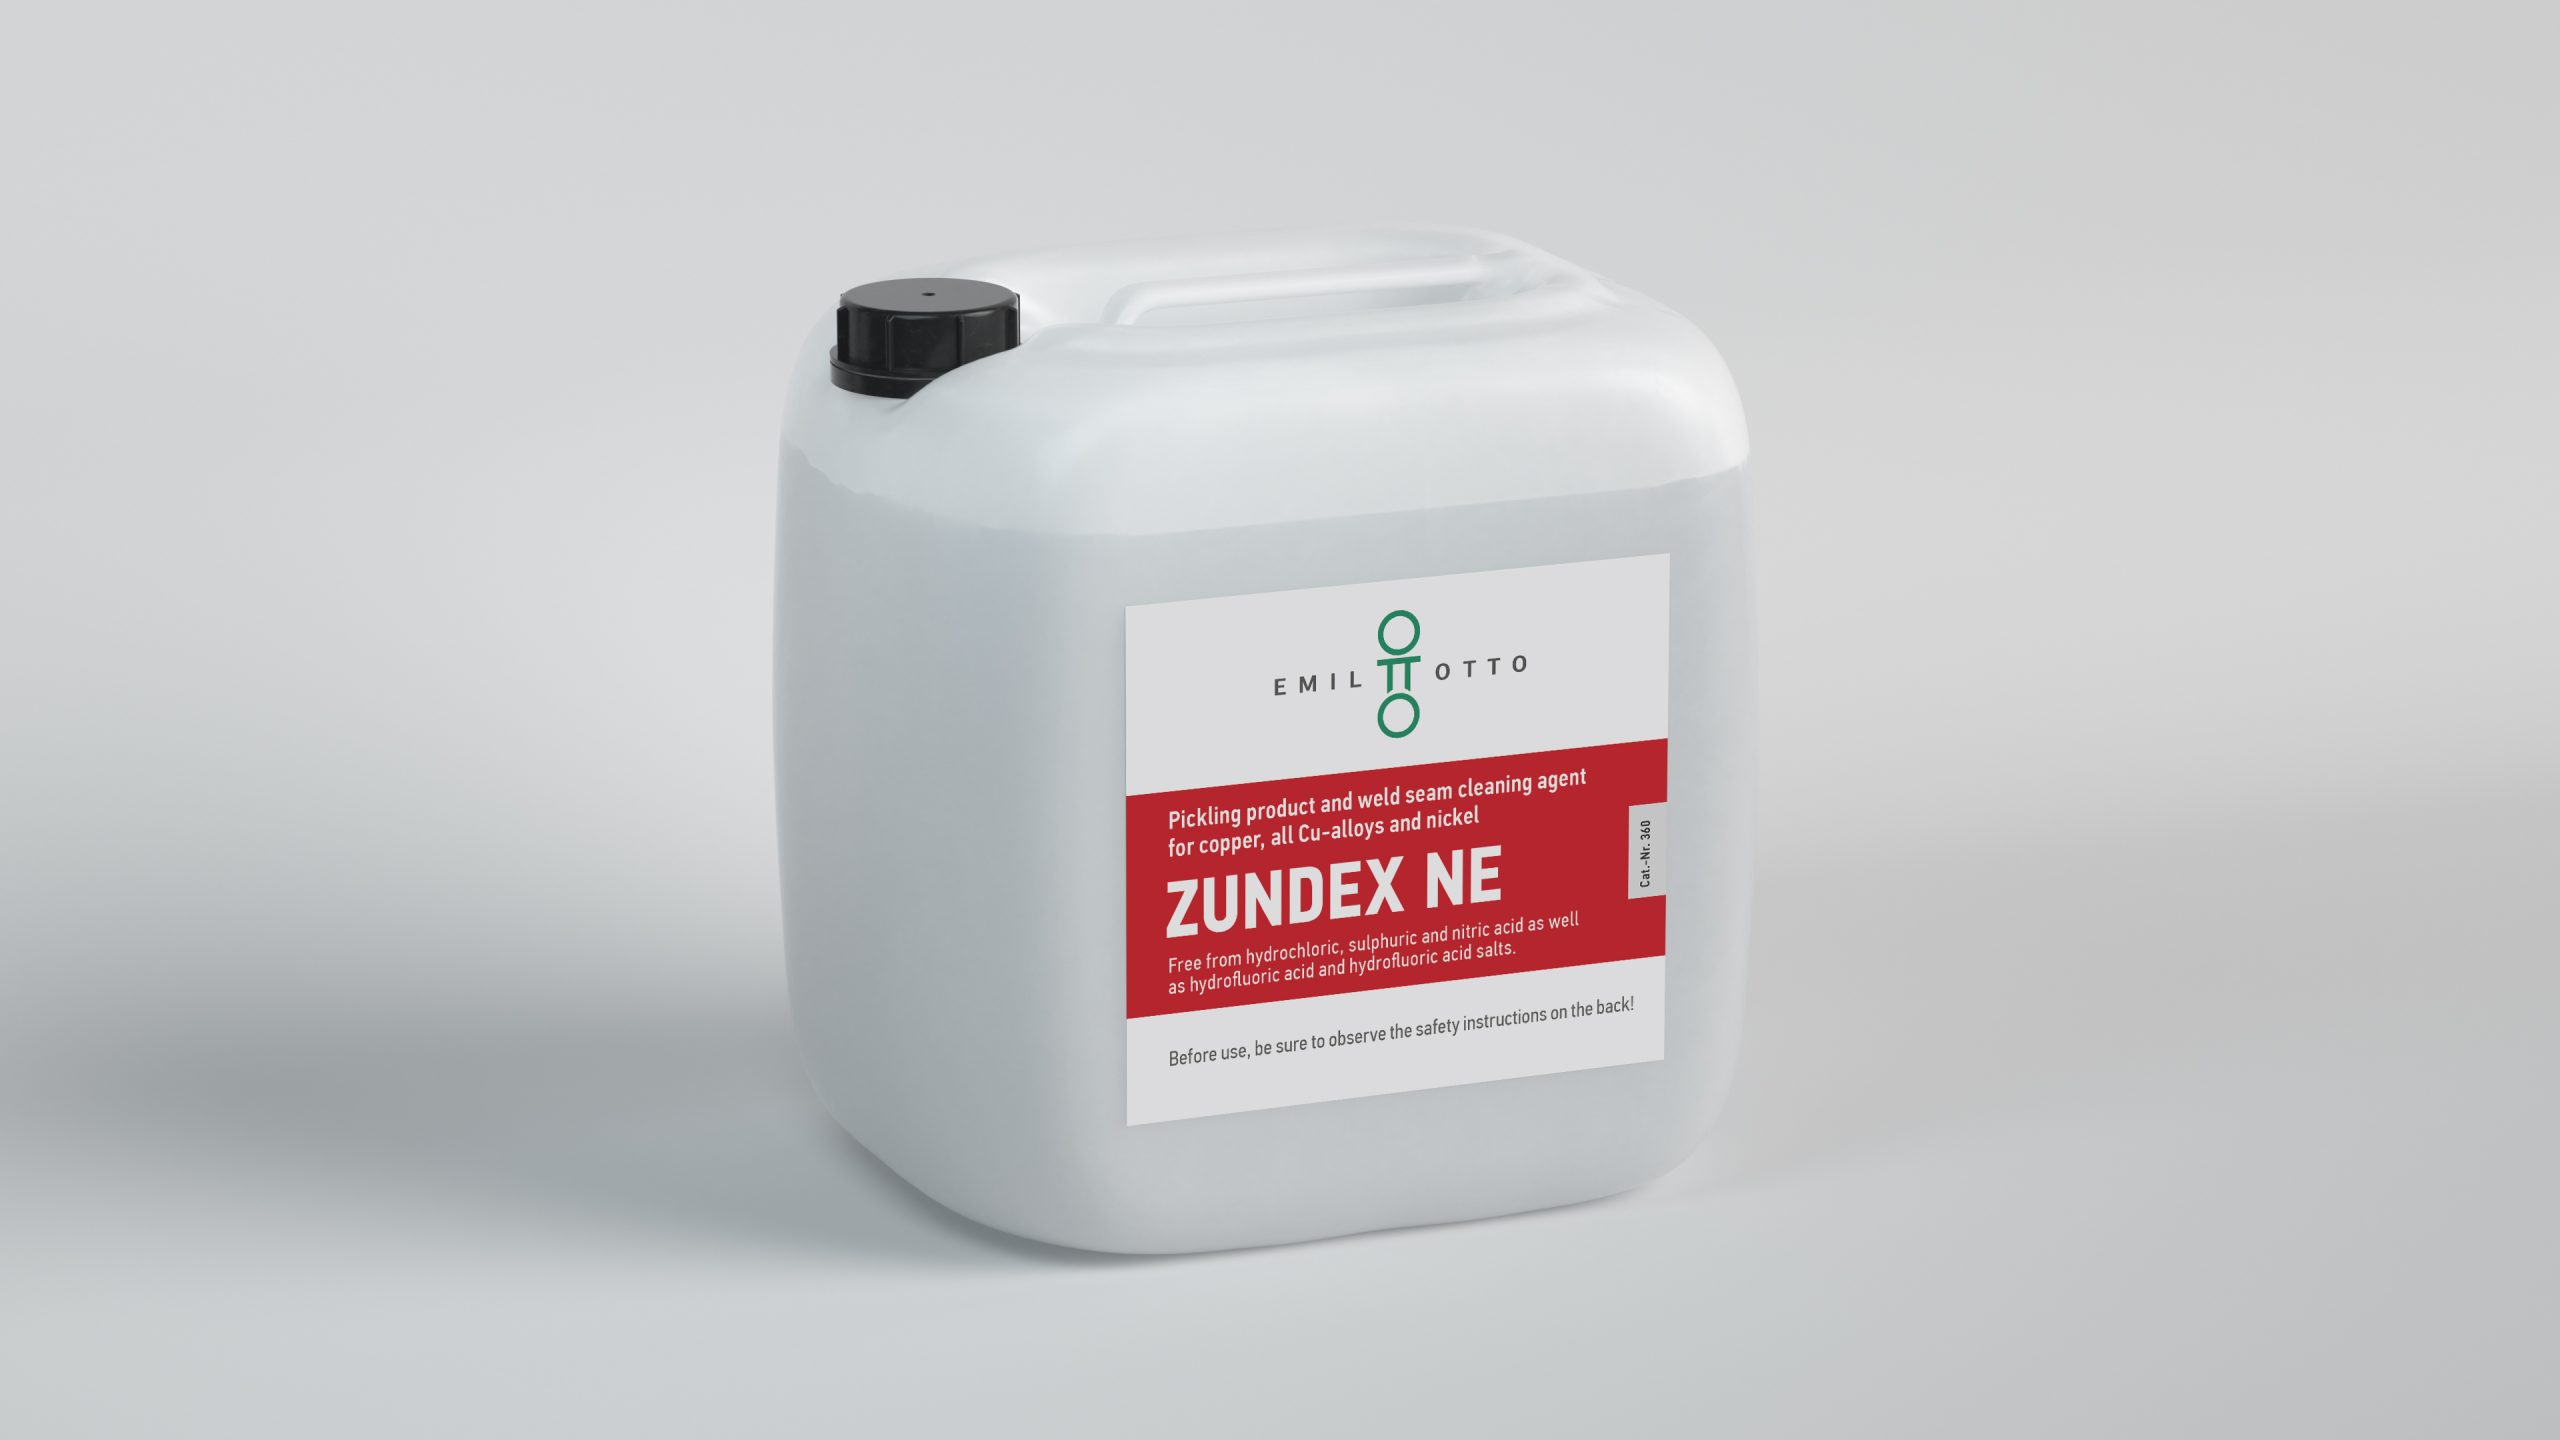 Emil Otto launches new pickling products for weld seam cleaning with Zundex range